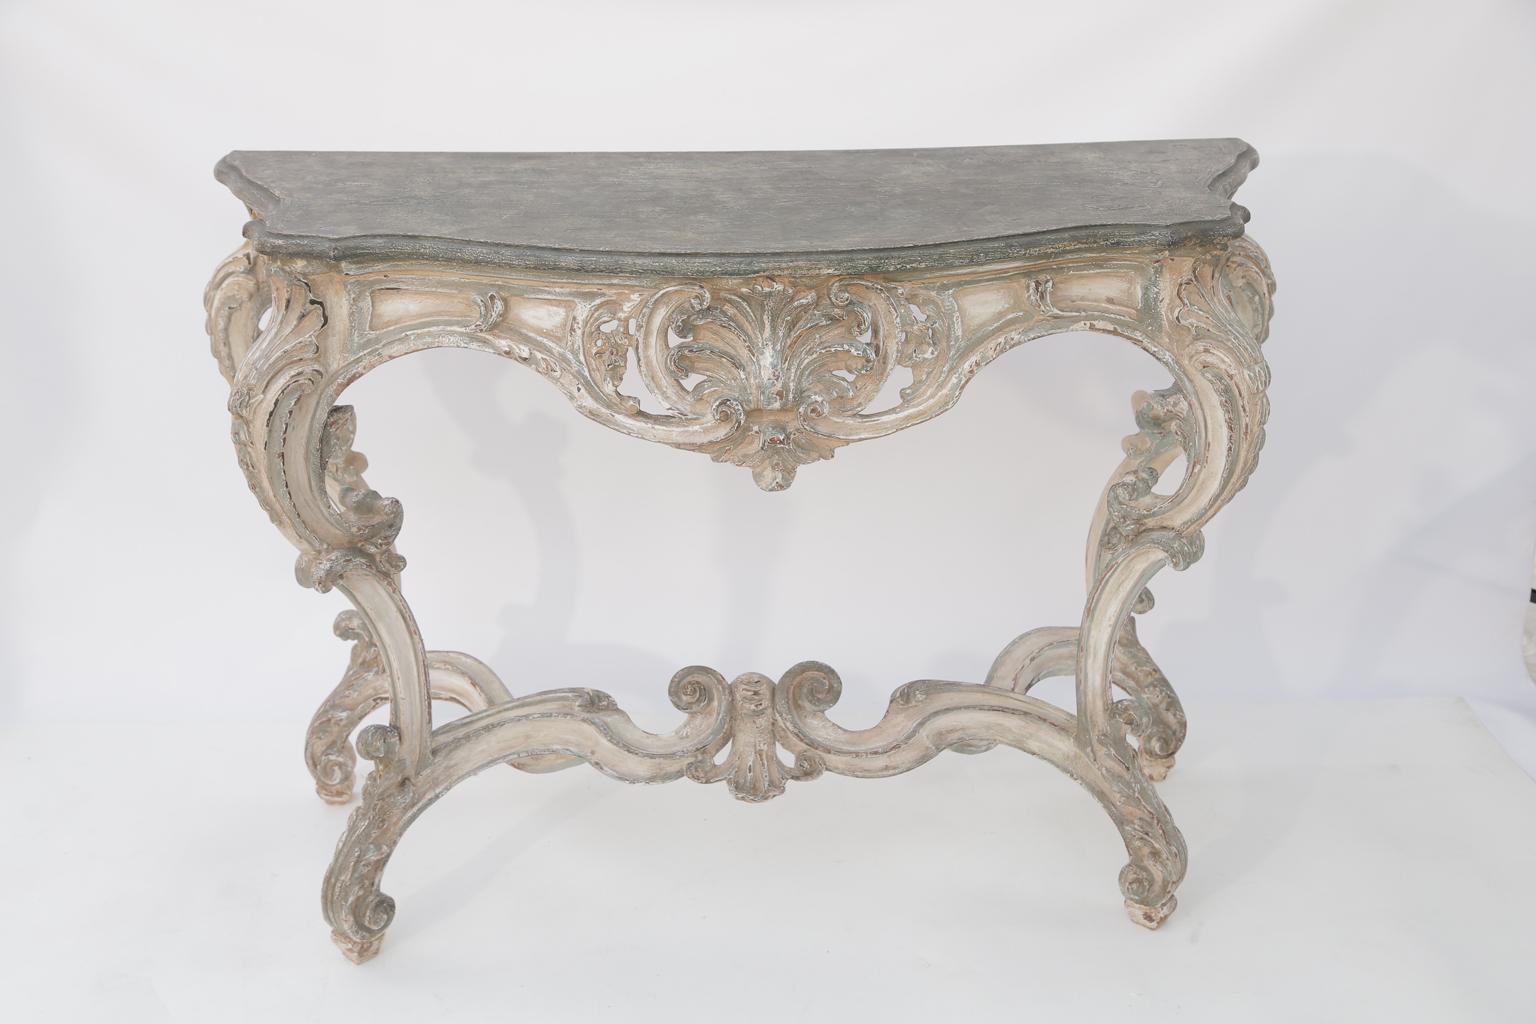 Italian Pair of 18th/19th Century Painted Rococo Consoles